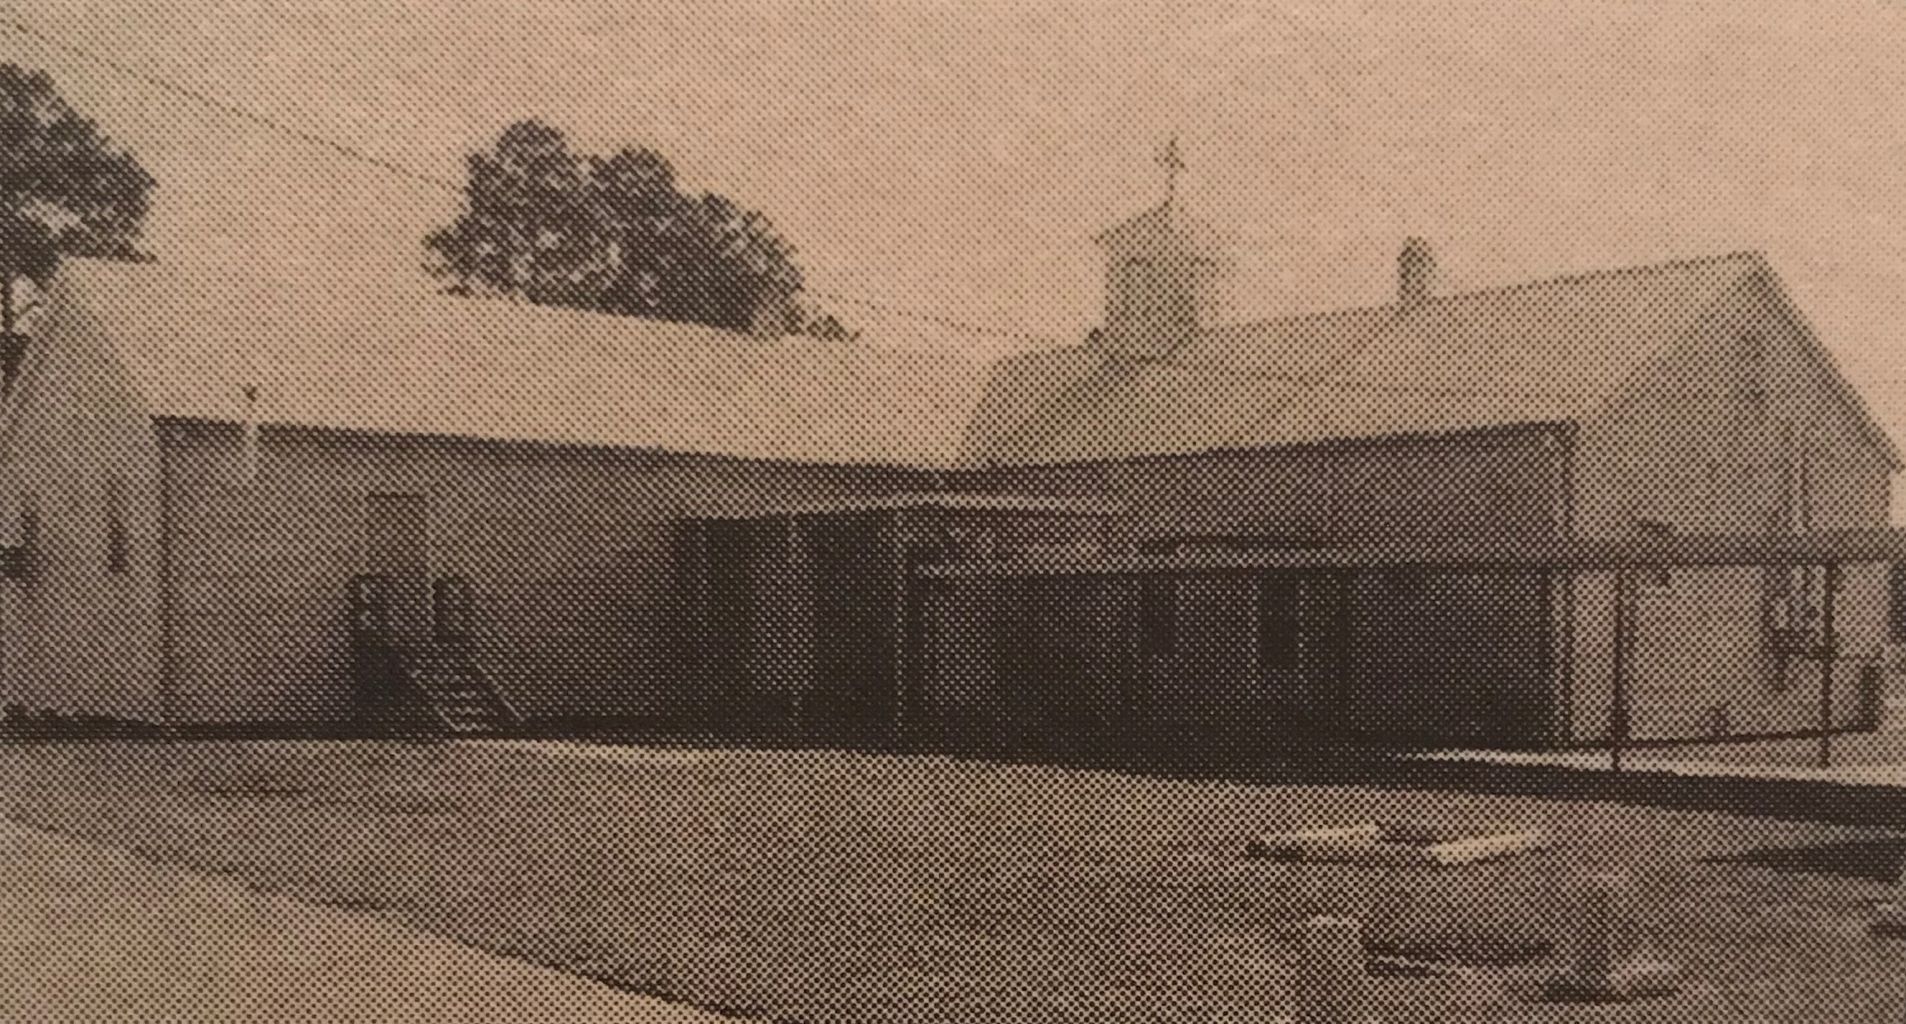 A black and white photo of a house with a cross on the roof